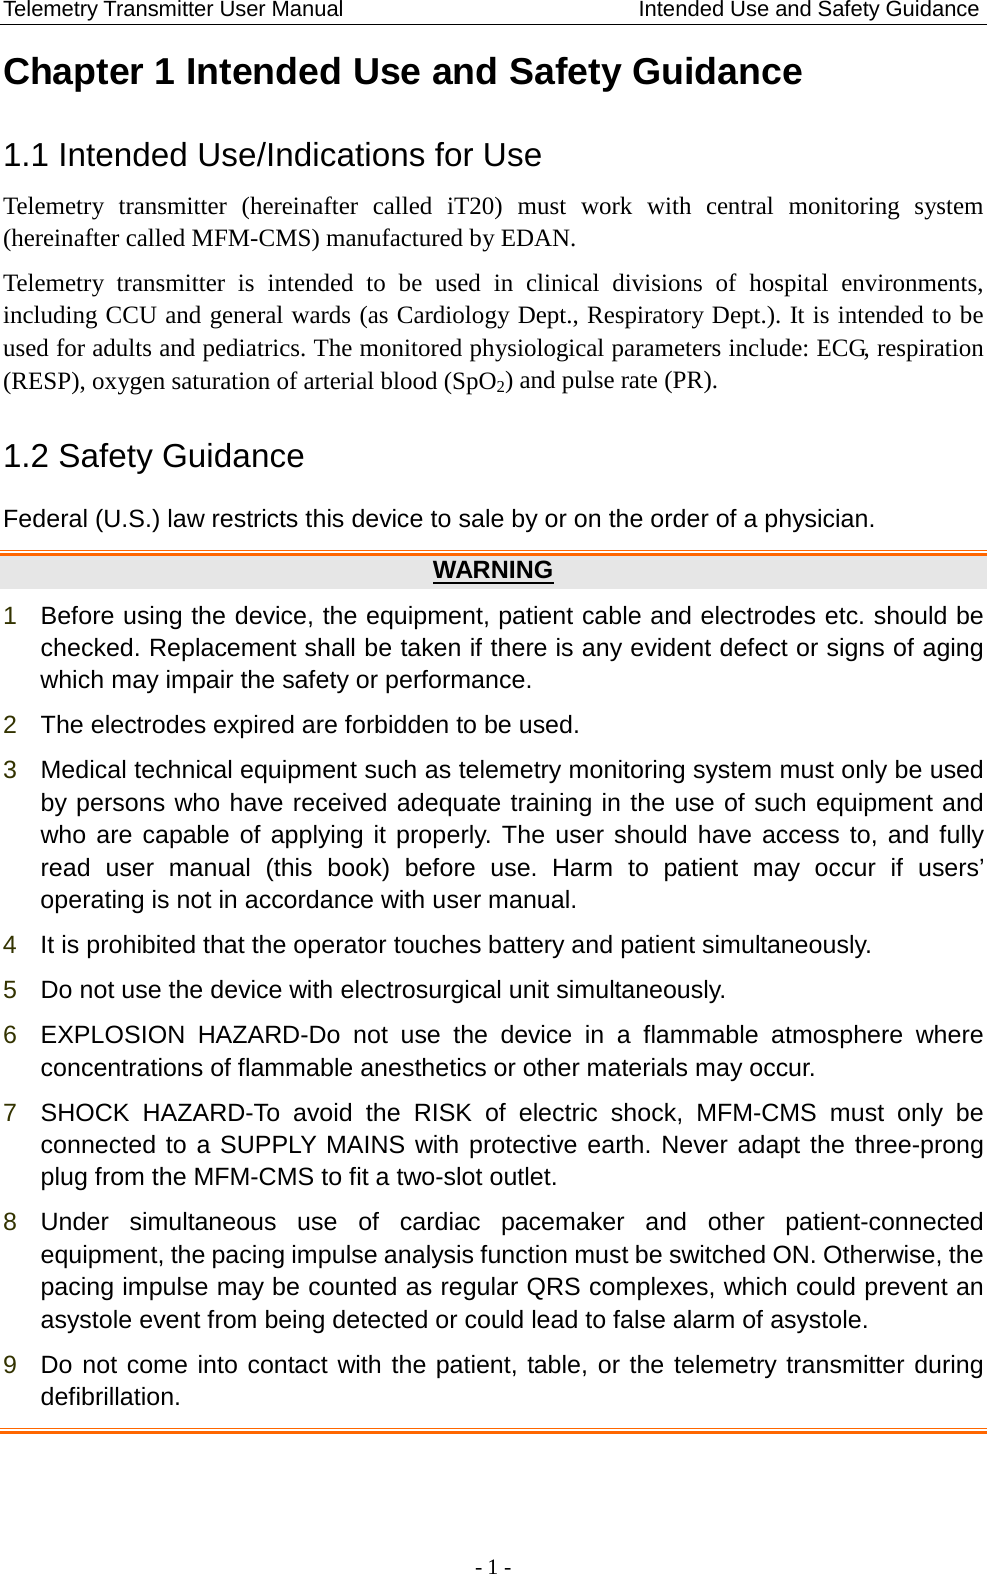 Telemetry Transmitter User Manual                           Intended Use and Safety Guidance Chapter 1 Intended Use and Safety Guidance 1.1 Intended Use/Indications for Use Telemetry transmitter (hereinafter called iT20) must work with central monitoring  system (hereinafter called MFM-CMS) manufactured by EDAN. Telemetry transmitter is intended to be used  in  clinical divisions of hospital environments, including CCU and general wards (as Cardiology Dept., Respiratory Dept.). It is intended to be used for adults and pediatrics. The monitored physiological parameters include: ECG, respiration (RESP), oxygen saturation of arterial blood (SpO2) and pulse rate (PR). 1.2 Safety Guidance   Federal (U.S.) law restricts this device to sale by or on the order of a physician. WARNING 1  Before using the device, the equipment, patient cable and electrodes etc. should be checked. Replacement shall be taken if there is any evident defect or signs of aging which may impair the safety or performance. 2  The electrodes expired are forbidden to be used. 3  Medical technical equipment such as telemetry monitoring system must only be used by persons who have received adequate training in the use of such equipment and who are capable of applying it properly. The user should have access to, and fully read  user manual (this book) before use.  Harm to patient may occur if  users’ operating is not in accordance with user manual. 4  It is prohibited that the operator touches battery and patient simultaneously. 5  Do not use the device with electrosurgical unit simultaneously. 6  EXPLOSION HAZARD-Do not use the device in a flammable atmosphere where concentrations of flammable anesthetics or other materials may occur. 7  SHOCK HAZARD-To avoid the RISK of electric shock, MFM-CMS must only be connected to a SUPPLY MAINS with protective earth. Never adapt the three-prong plug from the MFM-CMS to fit a two-slot outlet. 8  Under  simultaneous use of cardiac pacemaker and other patient-connected equipment, the pacing impulse analysis function must be switched ON. Otherwise, the pacing impulse may be counted as regular QRS complexes, which could prevent an asystole event from being detected or could lead to false alarm of asystole. 9  Do not come into contact with the patient, table, or the telemetry transmitter during defibrillation.    - 1 - 